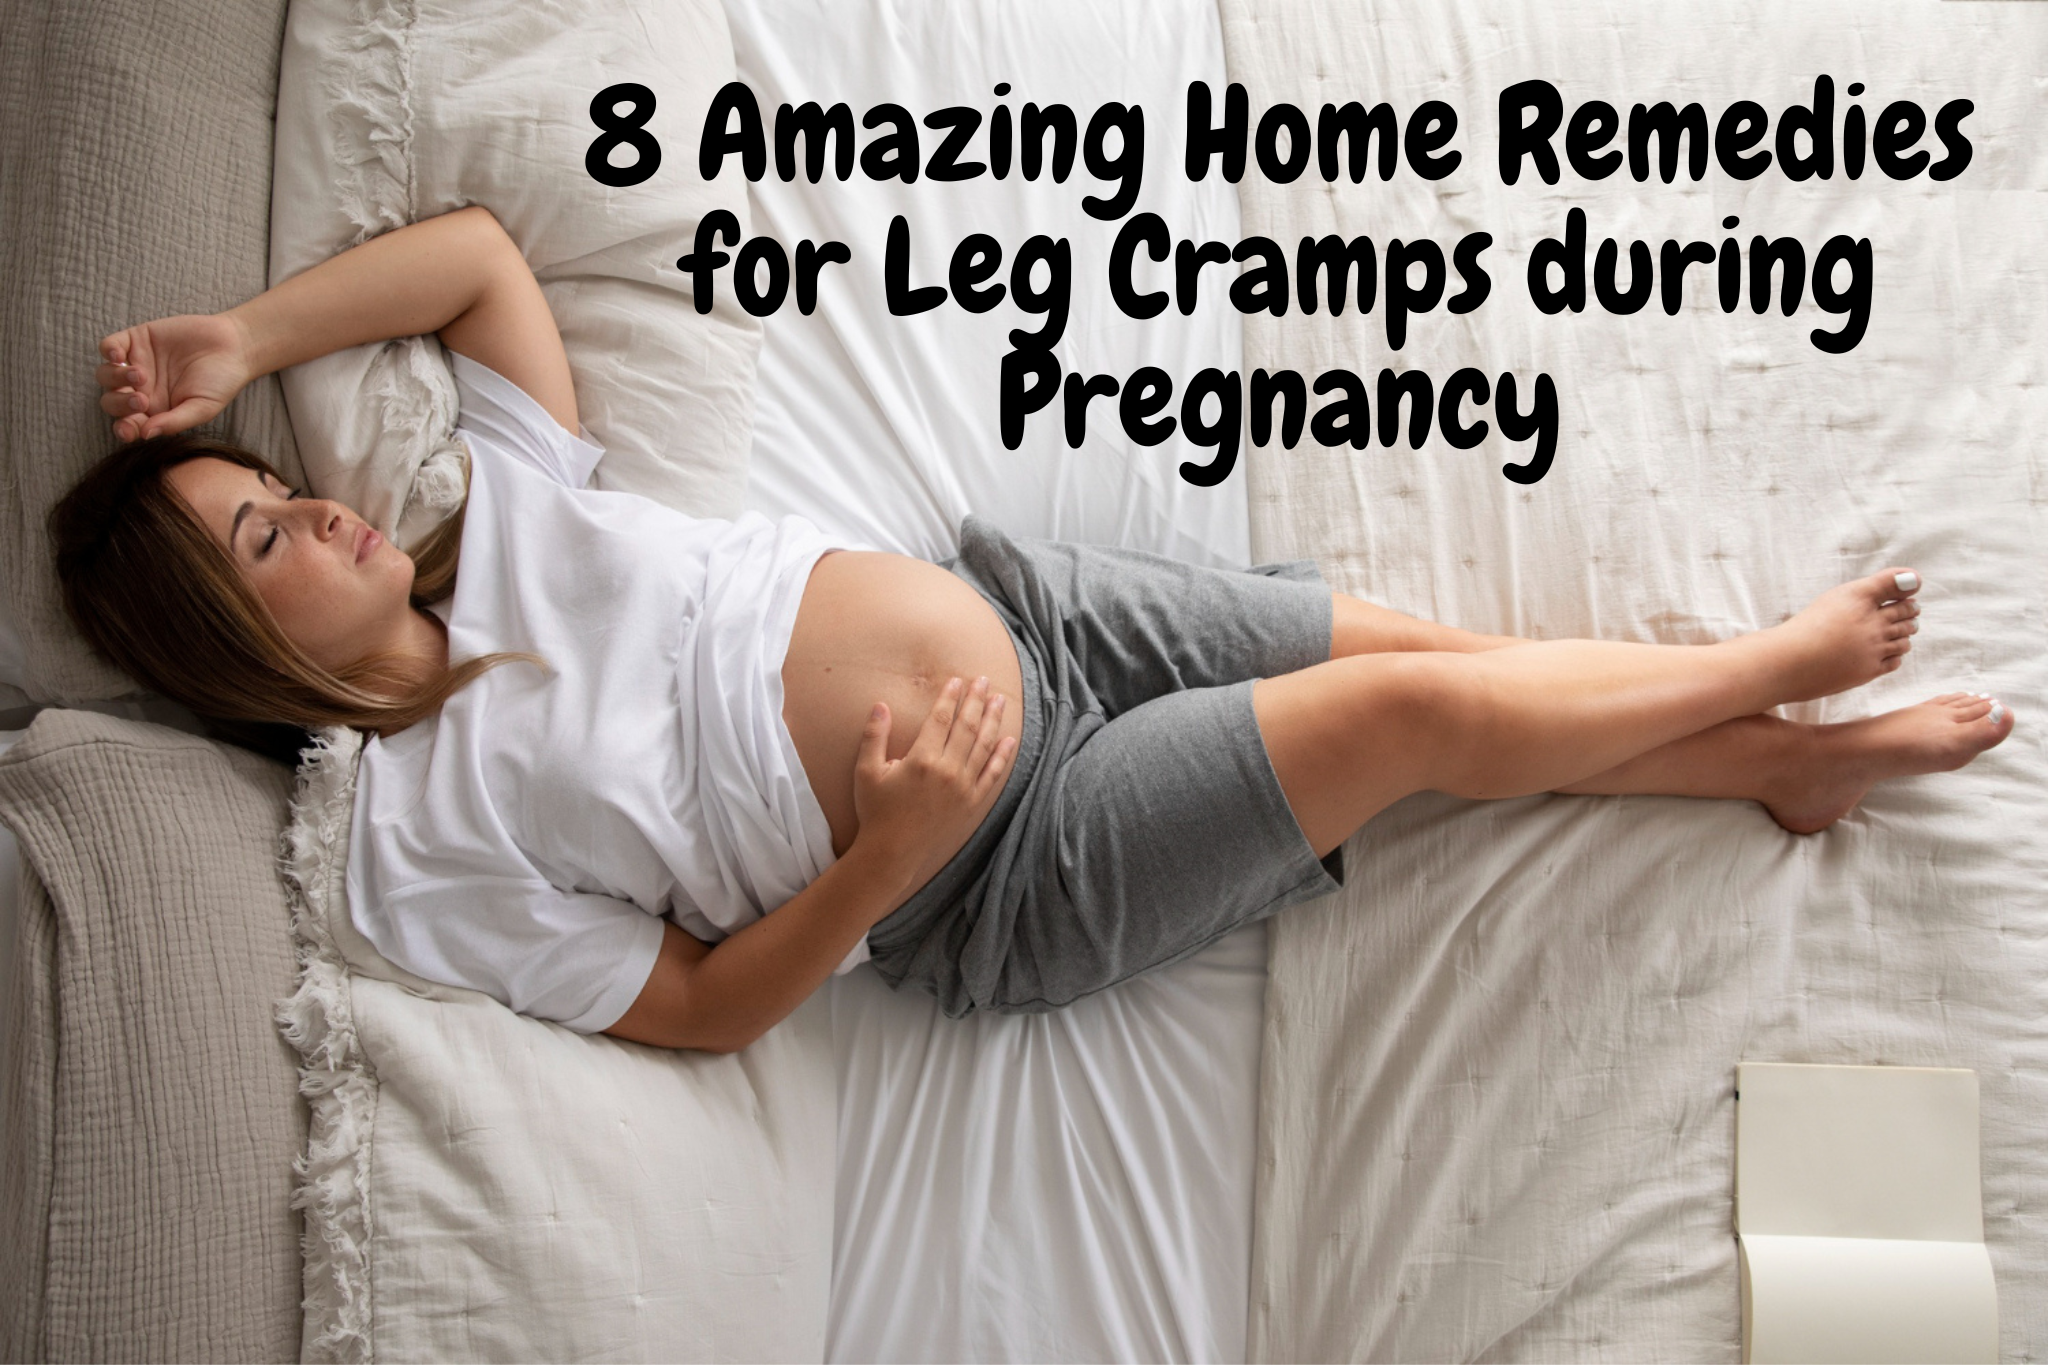 8 Amazing Home Remedies for Leg Cramps during Pregnancy